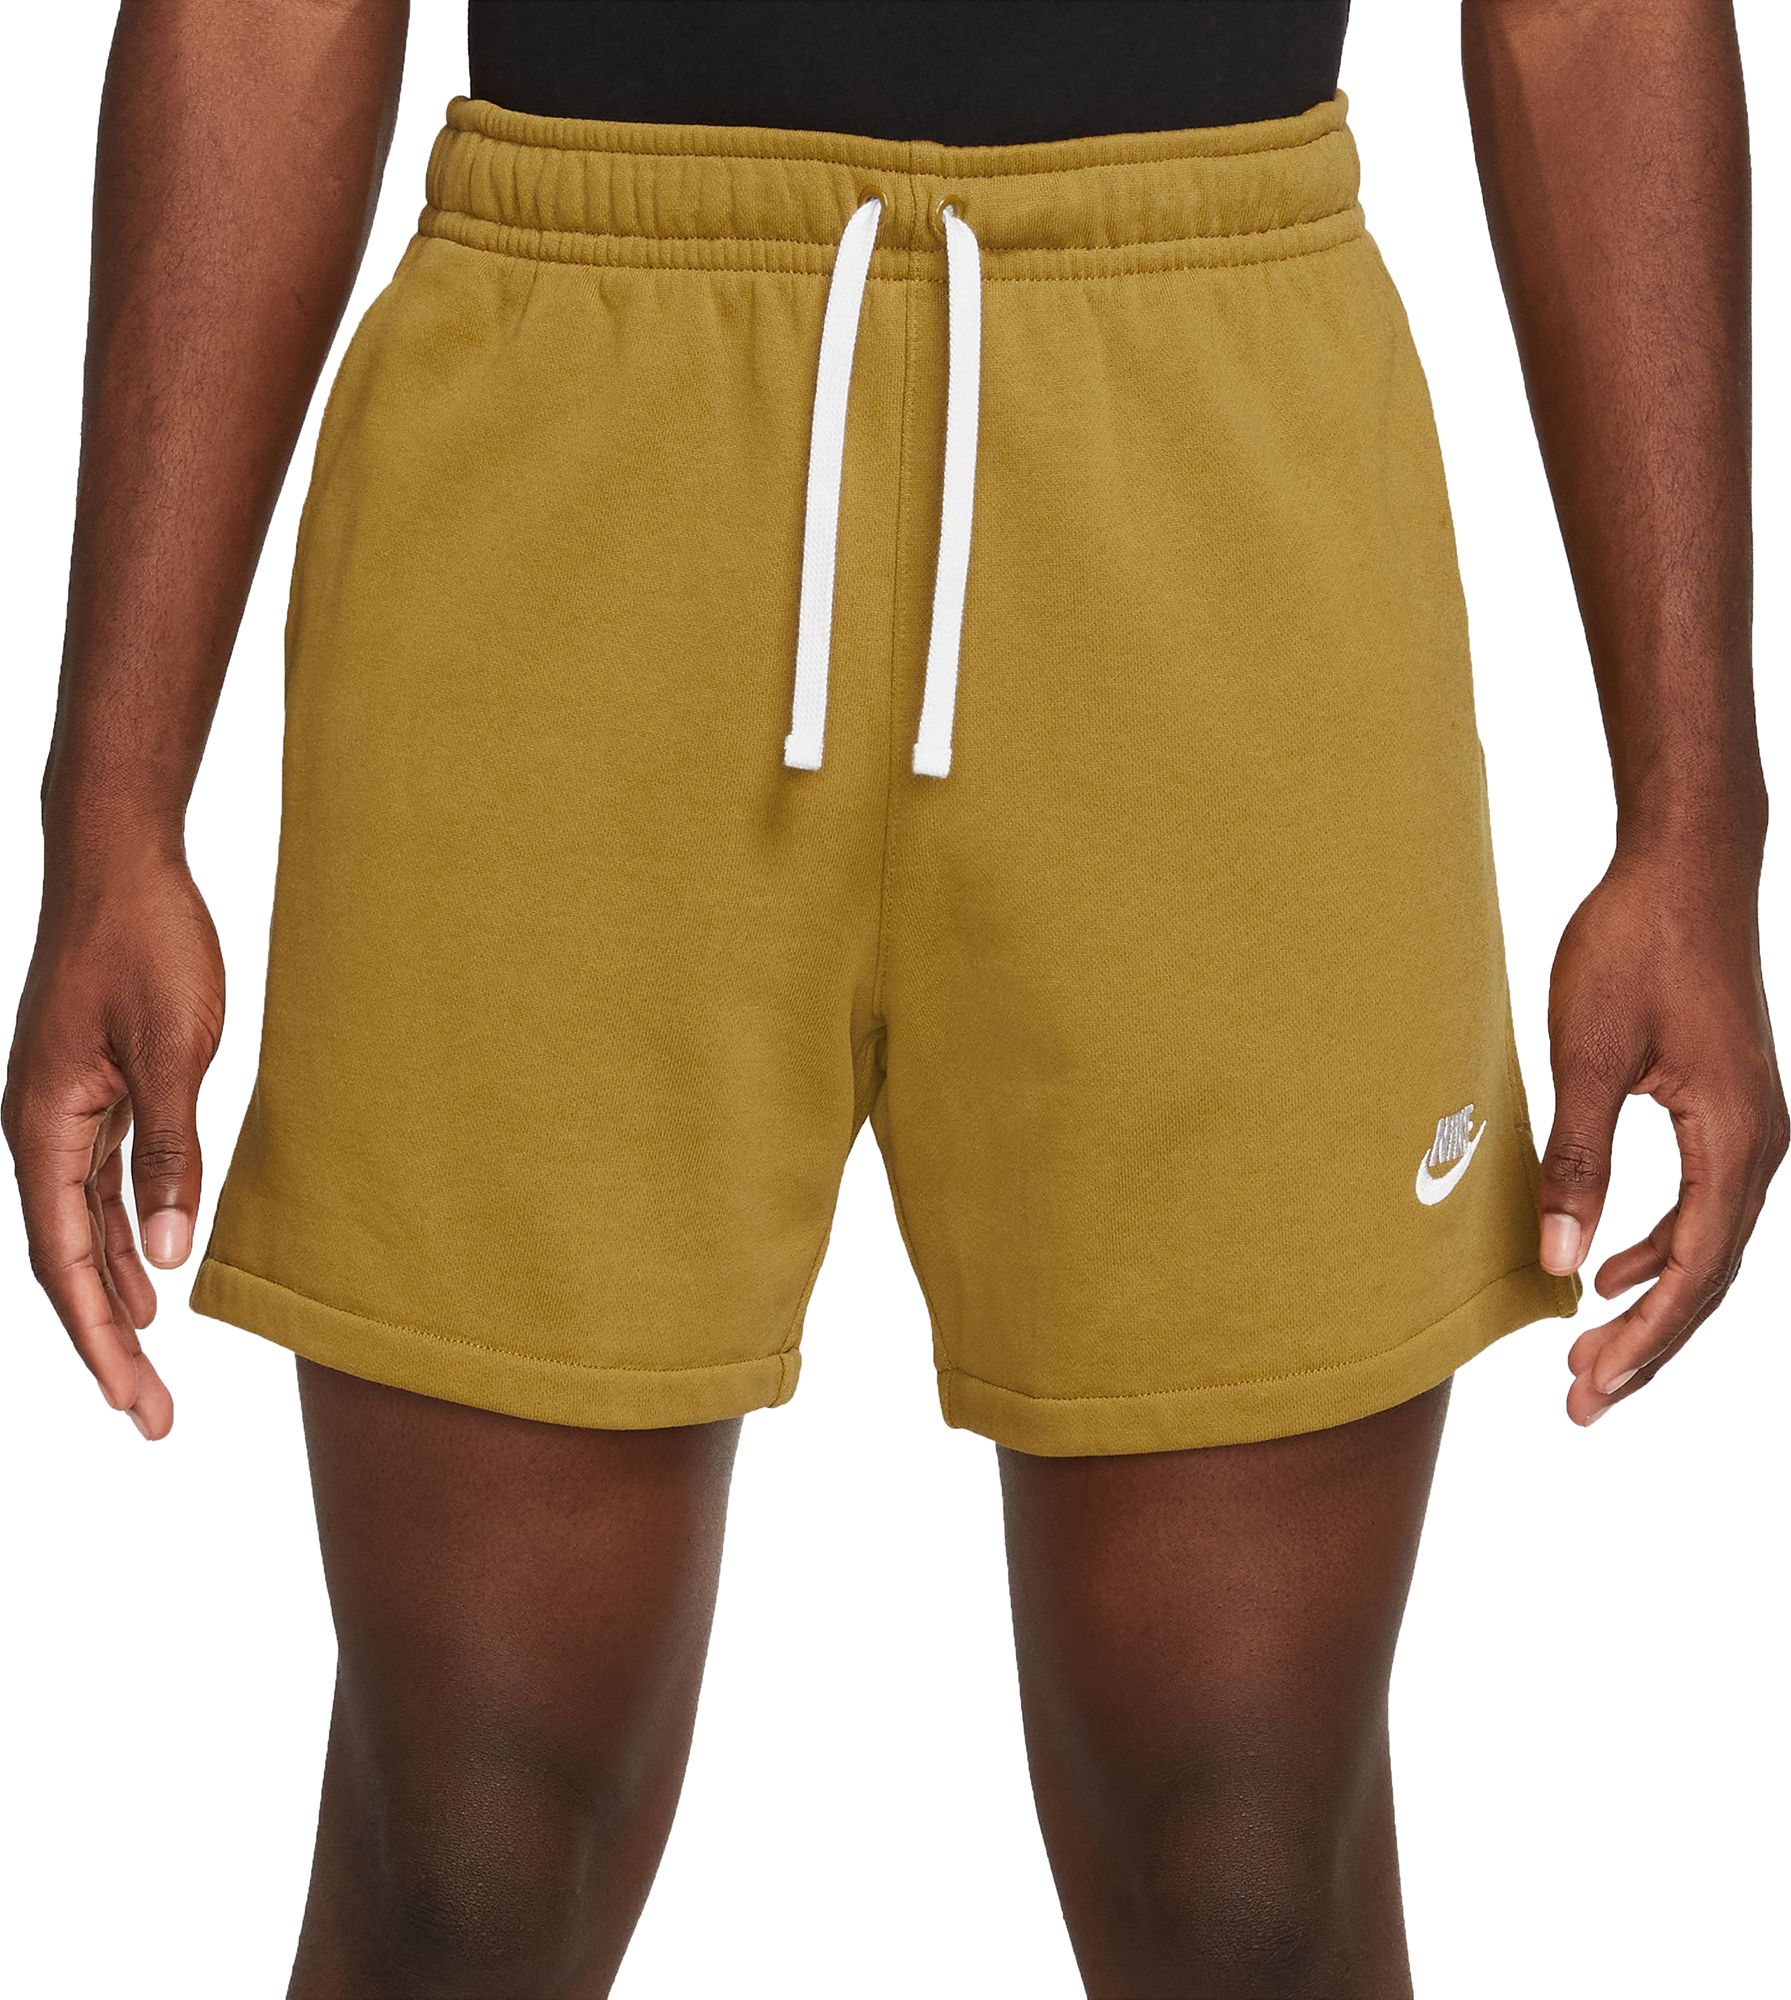 Nike Men's Club French Terry Flow Shorts (Bronzie) $16.12 + Free Shipping is on $49+